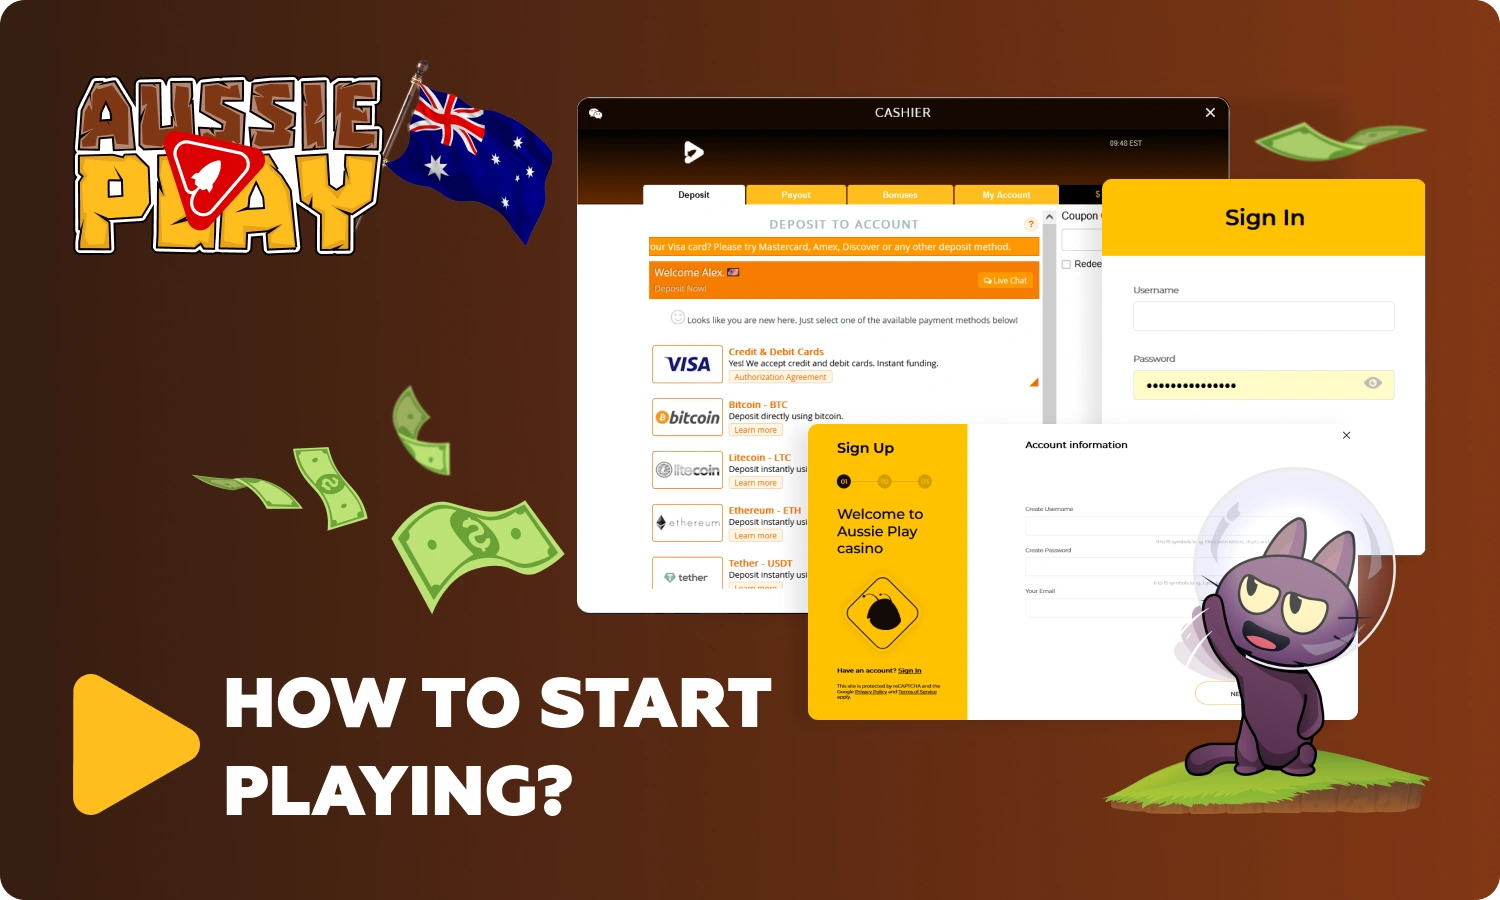 Aussie Play Casino players from Australia should familiarize themselves with the Terms and Conditions before playing